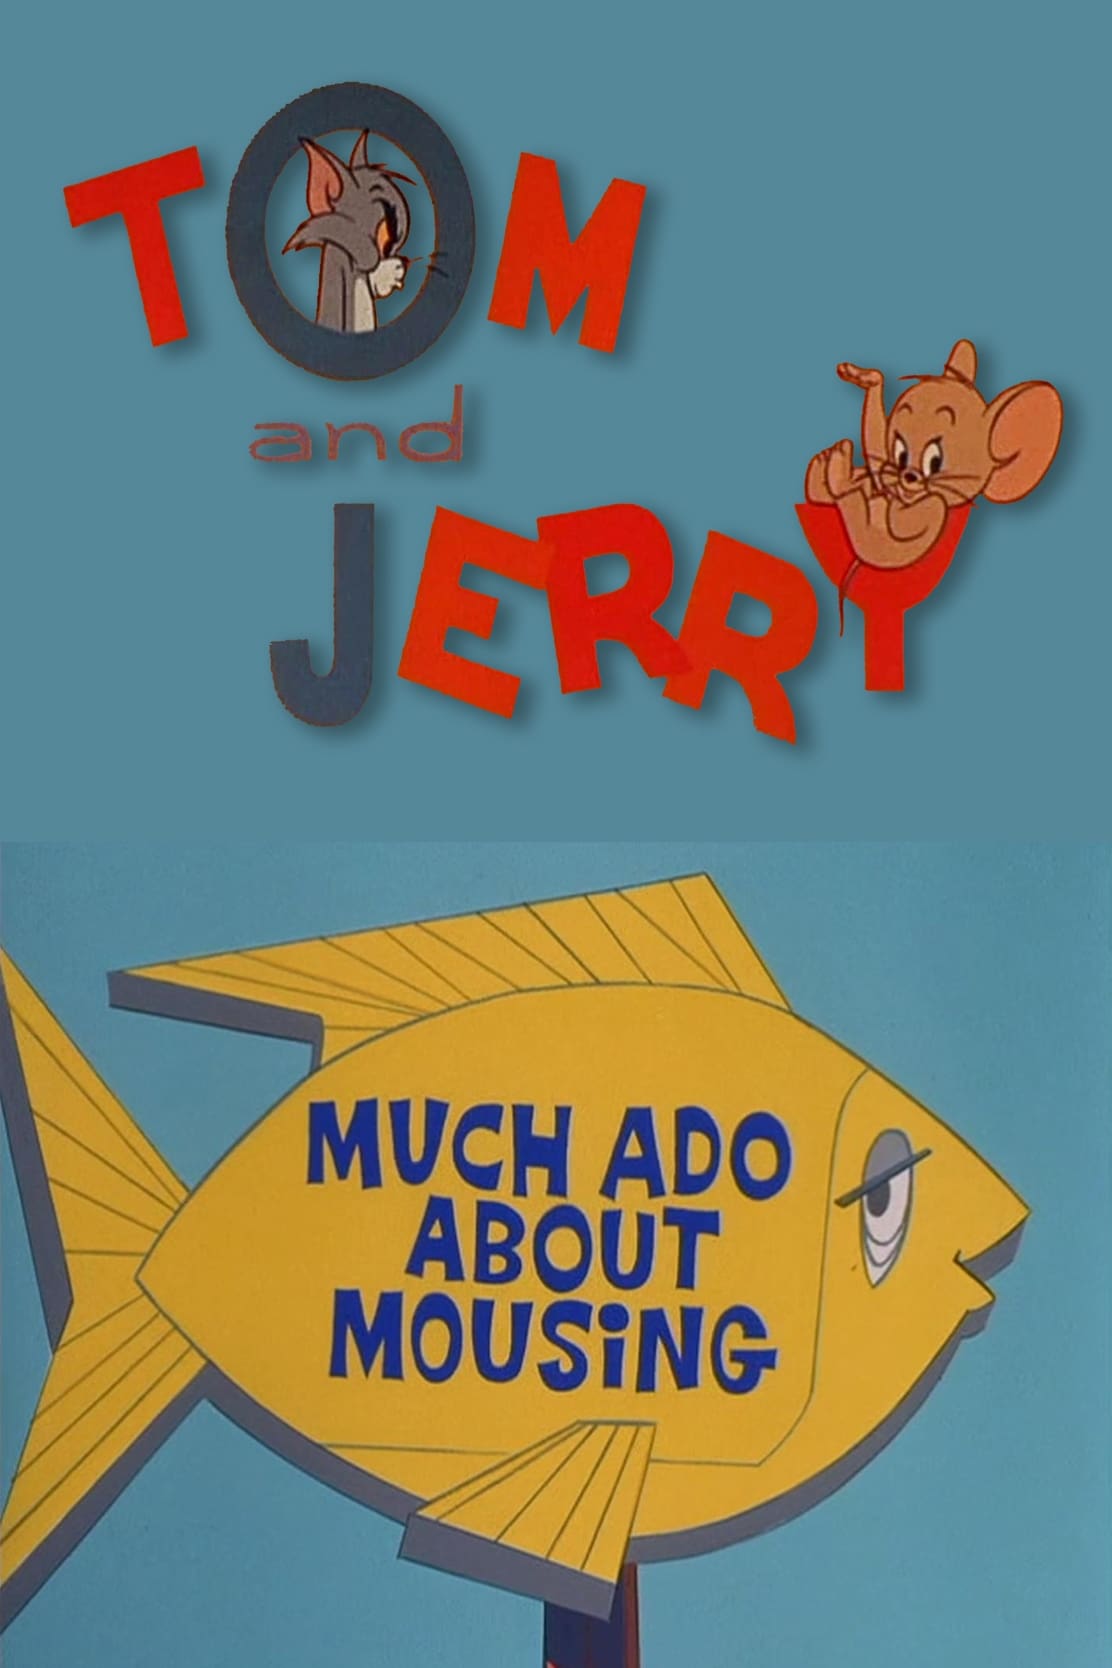 Much Ado About Mousing (1964)